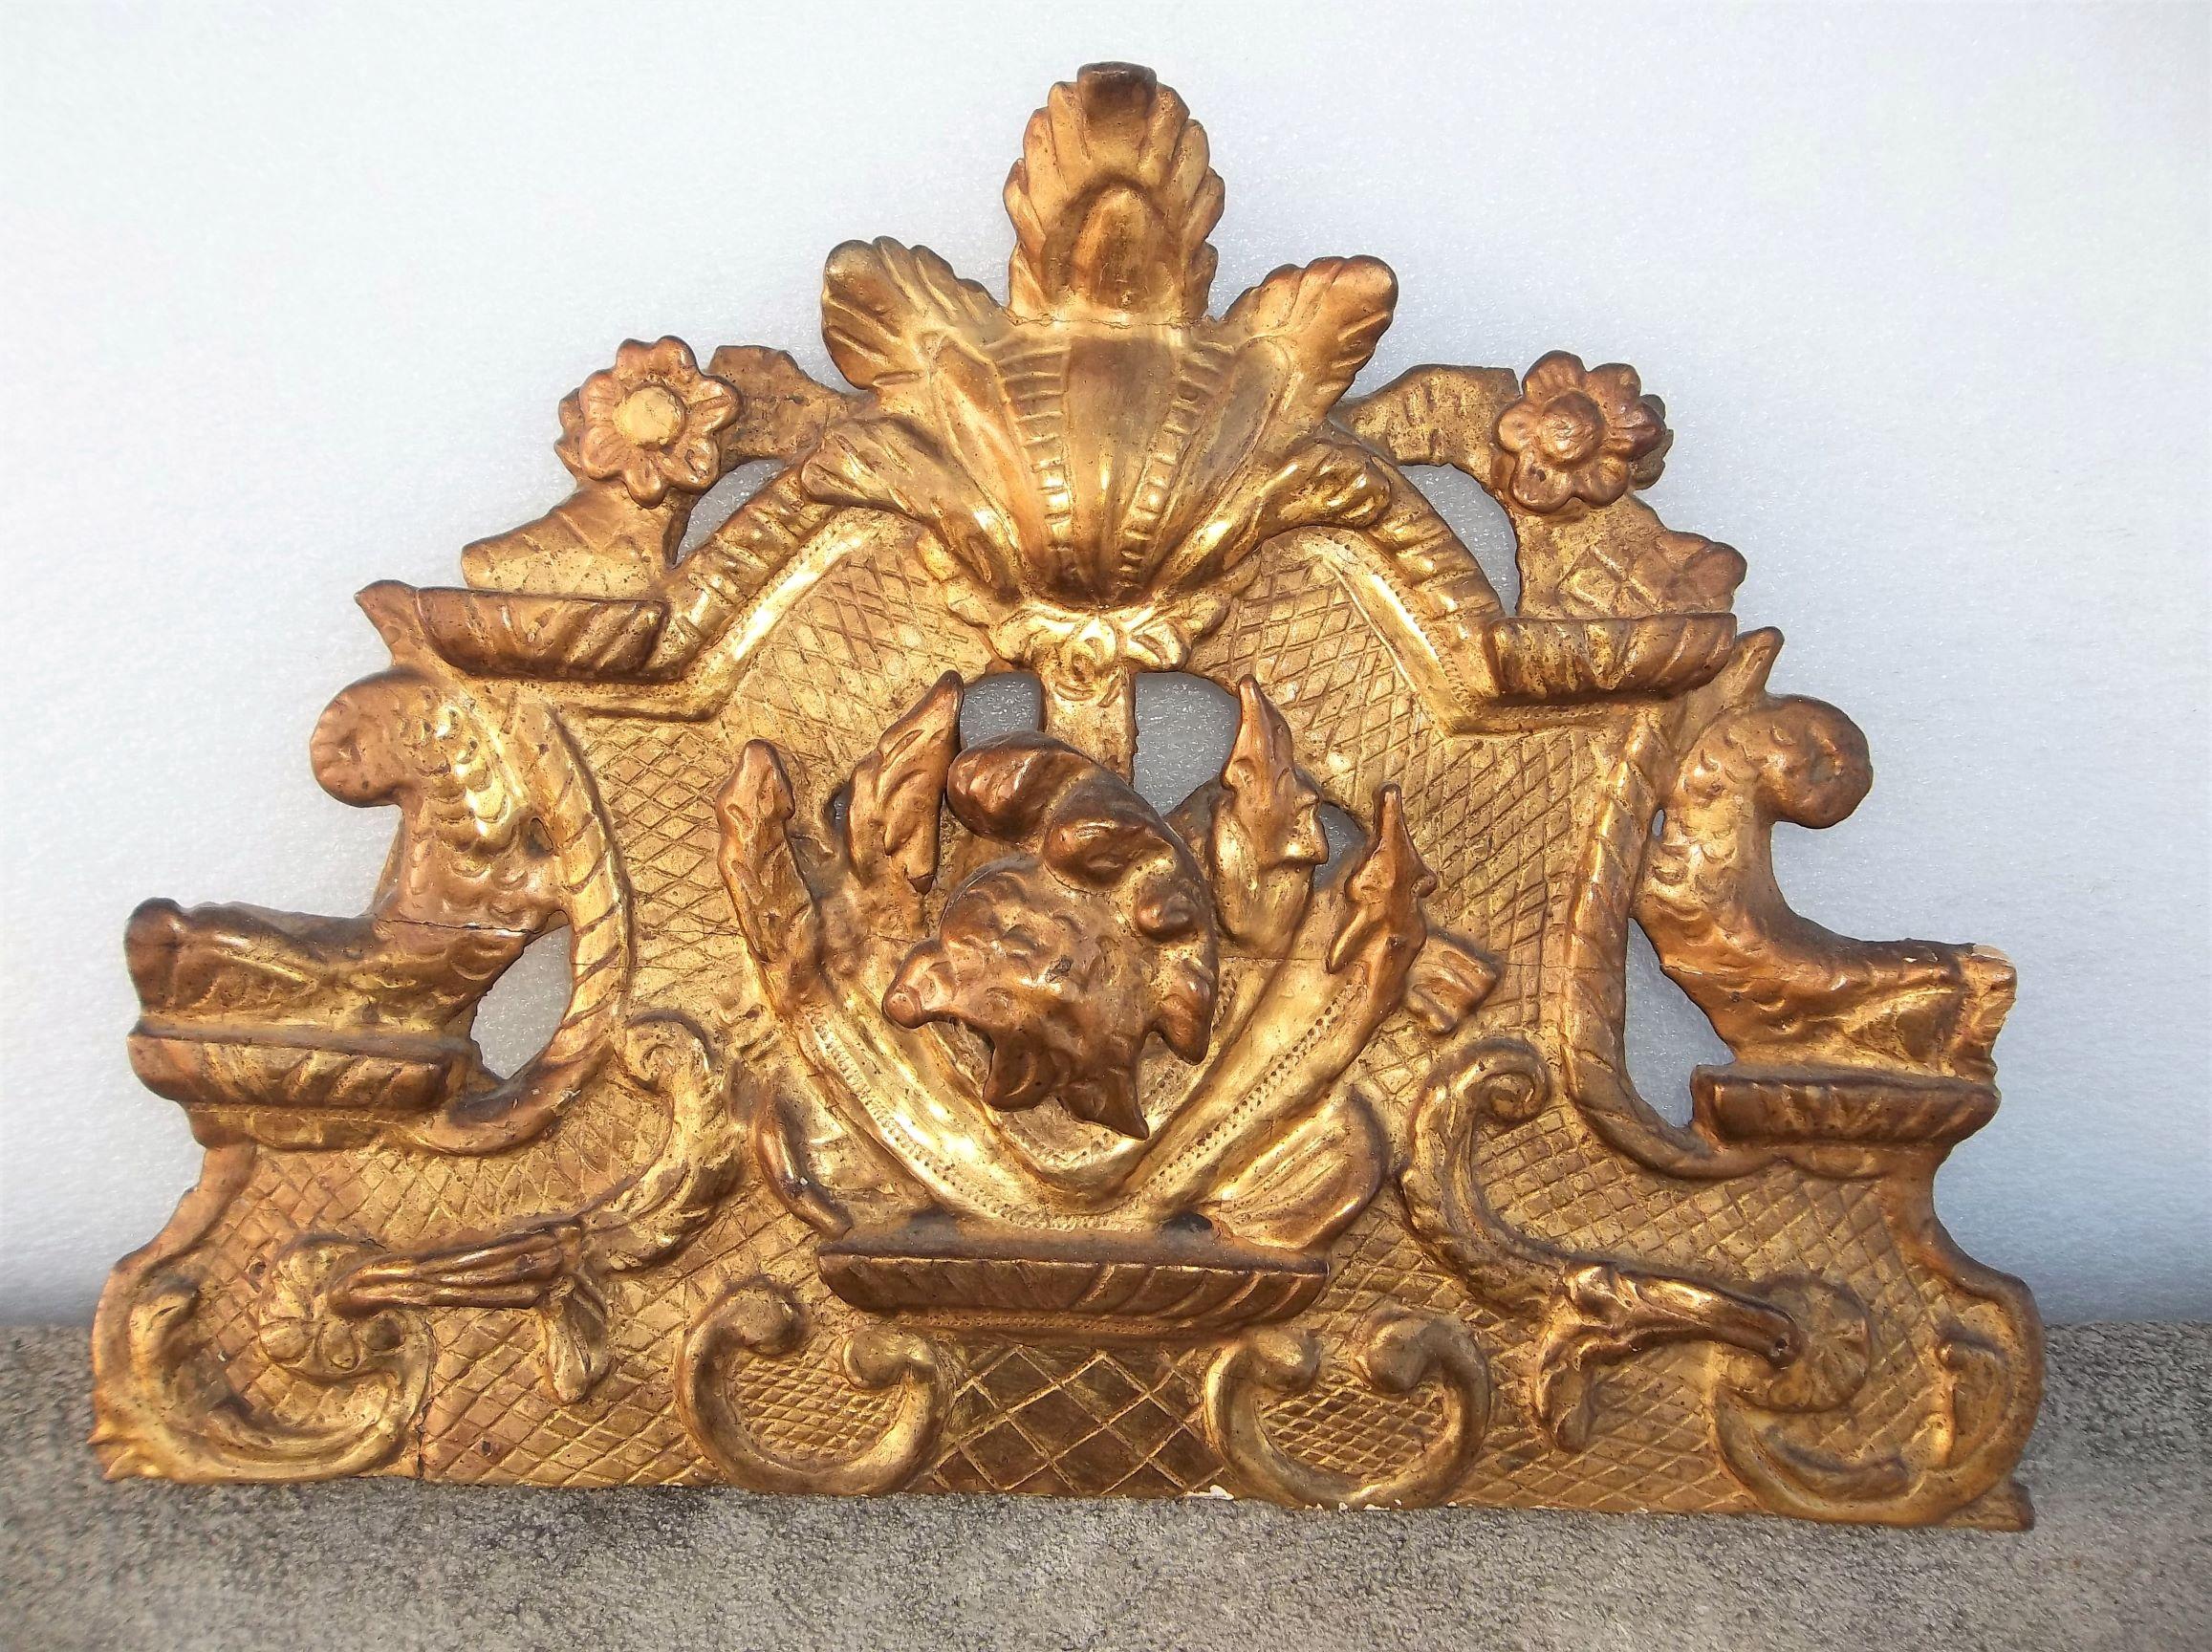 A carved, gesso'd and gilded gilt mirror crest or trophy, second half of the 19th century, possibly sold as a Grand Tour souvenir.
Wall hook on back or comes with stand for sitting on consoles or chests . (see photos).

Nice old gilt patina but with